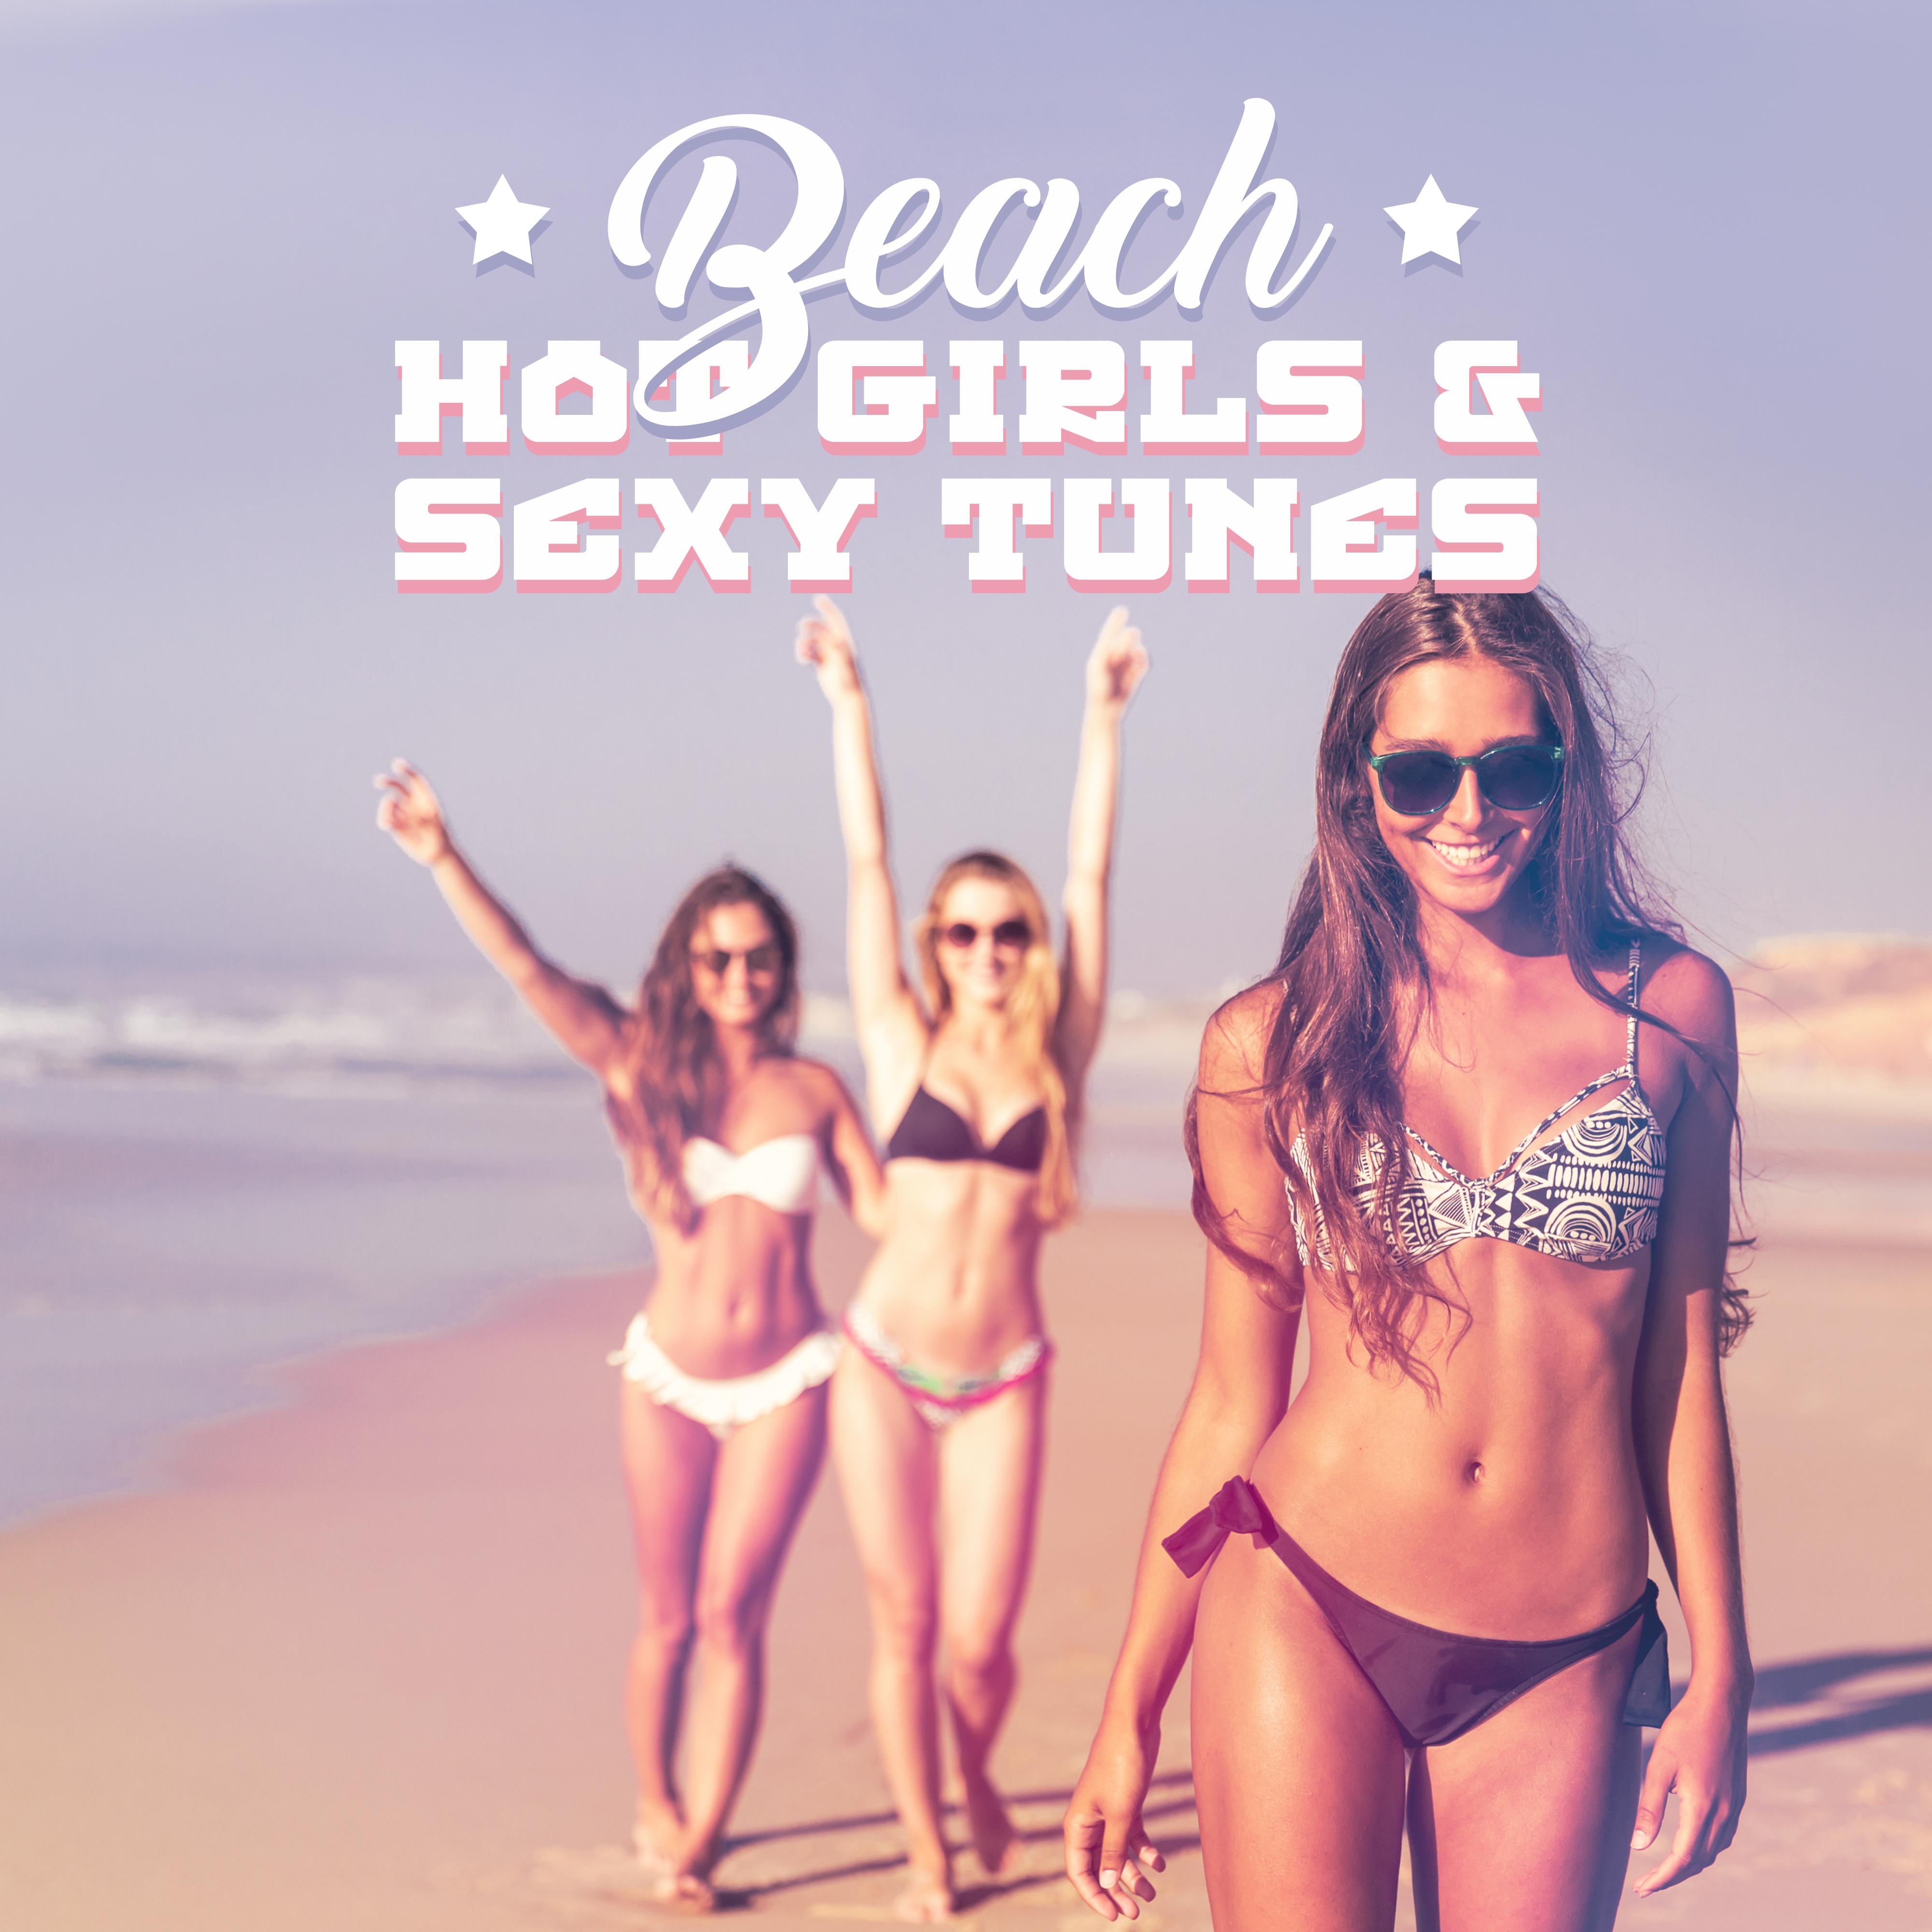 Beach, Hot Girls & **** Tunes: 2019 Chillout Fresh Vibes Mix, Tropical Summer Vacation Chill House Style Music, Pumping Deep Beats & Ambient Melodies, Songs for Total Relax or Pool Party, Sun Salutation